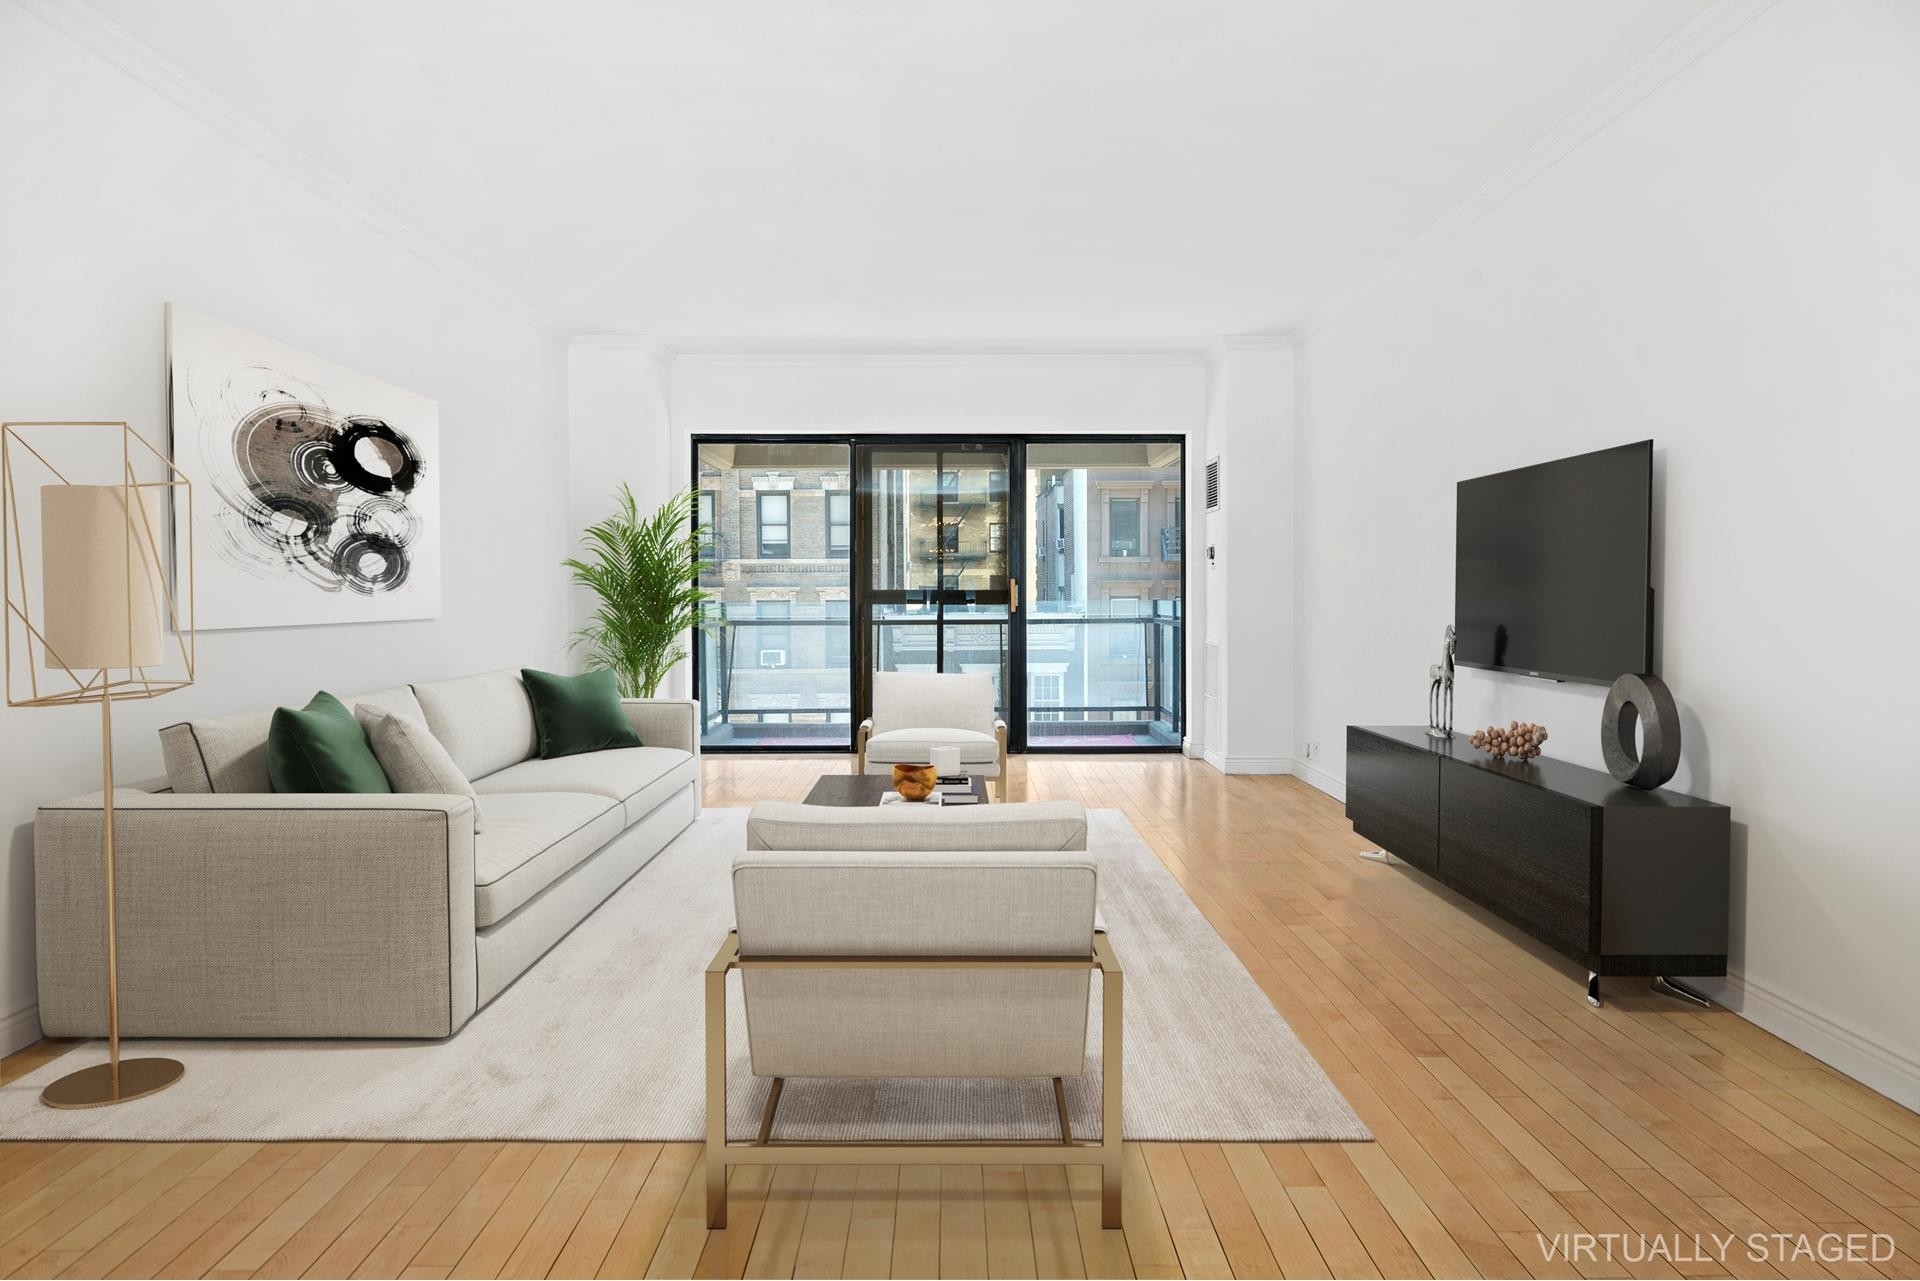 Co-op Properties for Sale at The Sovereign, 425 E 58TH ST , 4H Sutton Place, New York, New York 10022